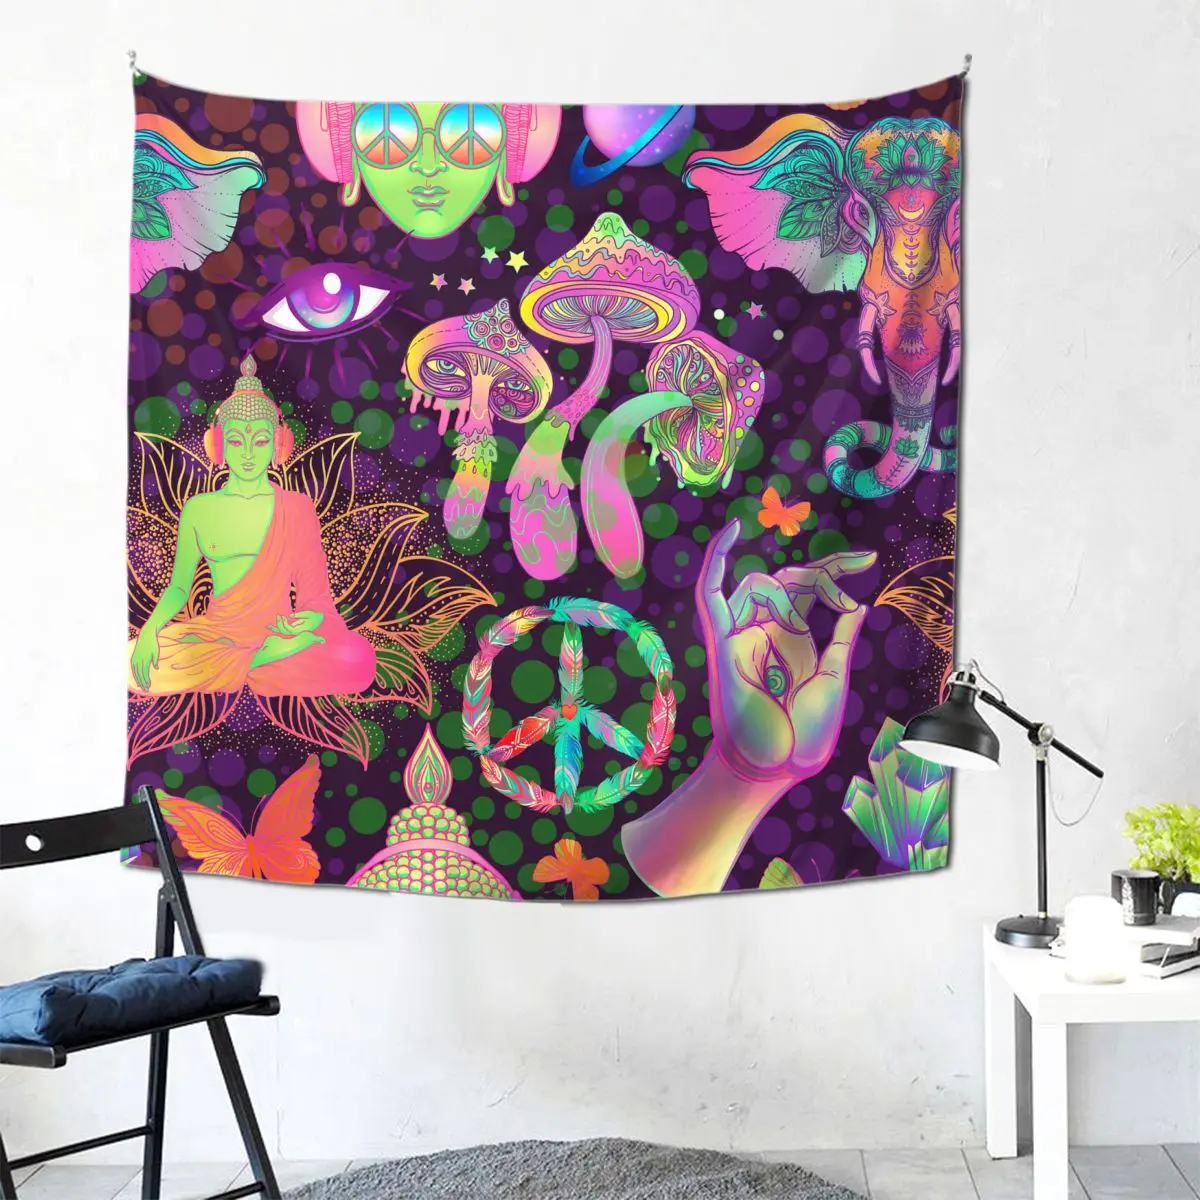 

Meditation Buddha Psychedelic Mandala Tapestry Colorful Wall Hanging Mushroom Zen Room Decor Table Cover Retro Tapestries